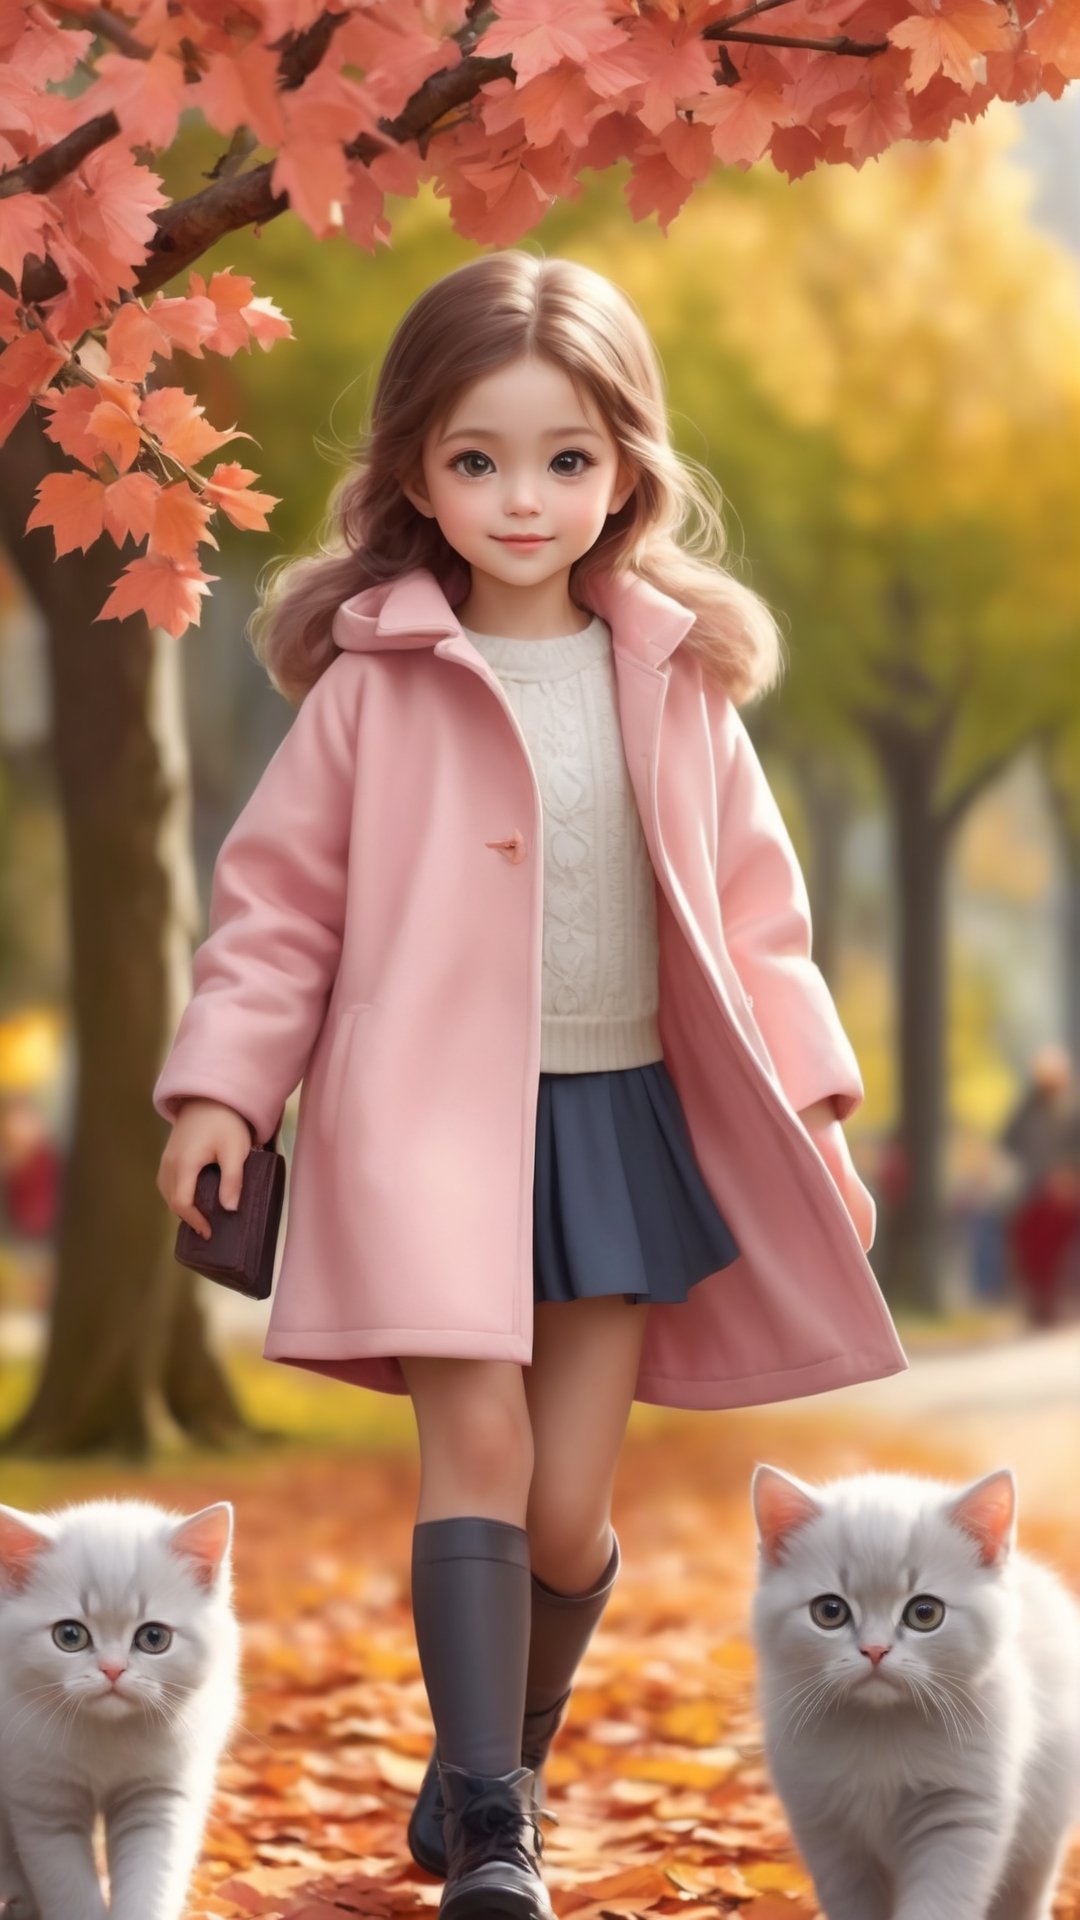 Side view shot, Turn around and look ahead, A beautiful big eyes and adorable little girl with two cute little fluffy fat kittens wearing pink coat walking on the apples tree branch from the treeand street, smiled happily, Autumn style, realistic high quality orange tree, apples full the branch, maple leaves falling, big eyes so cute and beautiful, under the tree have a table, and apples and beautiful flowers, maple leaves falling, orange near flowers, Turn around and look viewers , pink flowers blooming fantastic amazing and romantic lighting bokeh, pink flowers blooming realistic and green plants amazing tale and lighting as background, Xxmix_Catecat